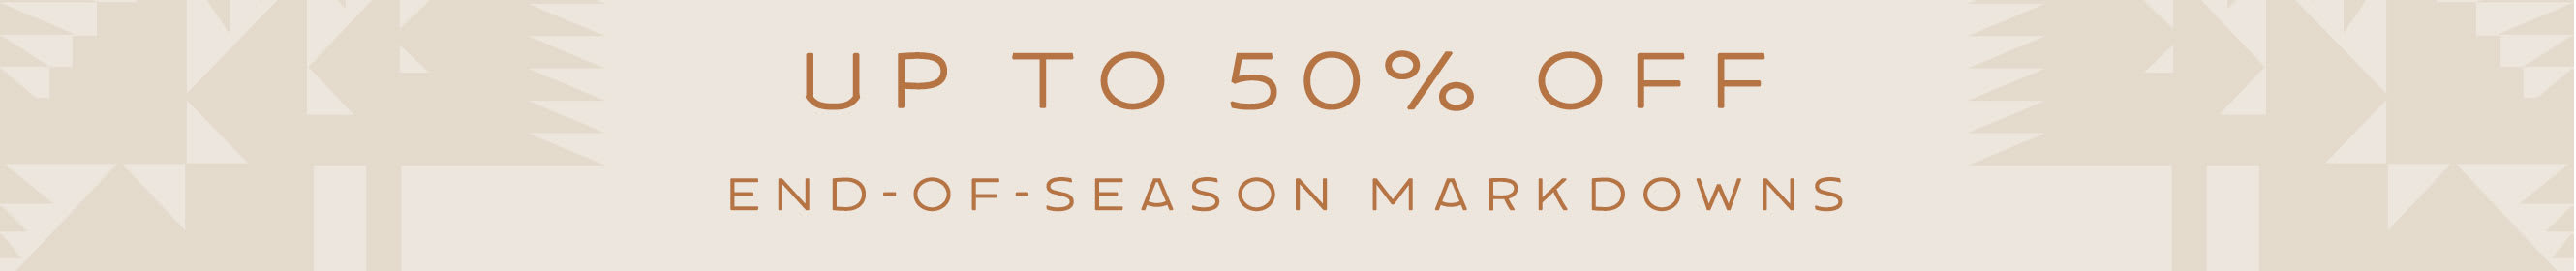 Up to 50% off End of Season Markdowns